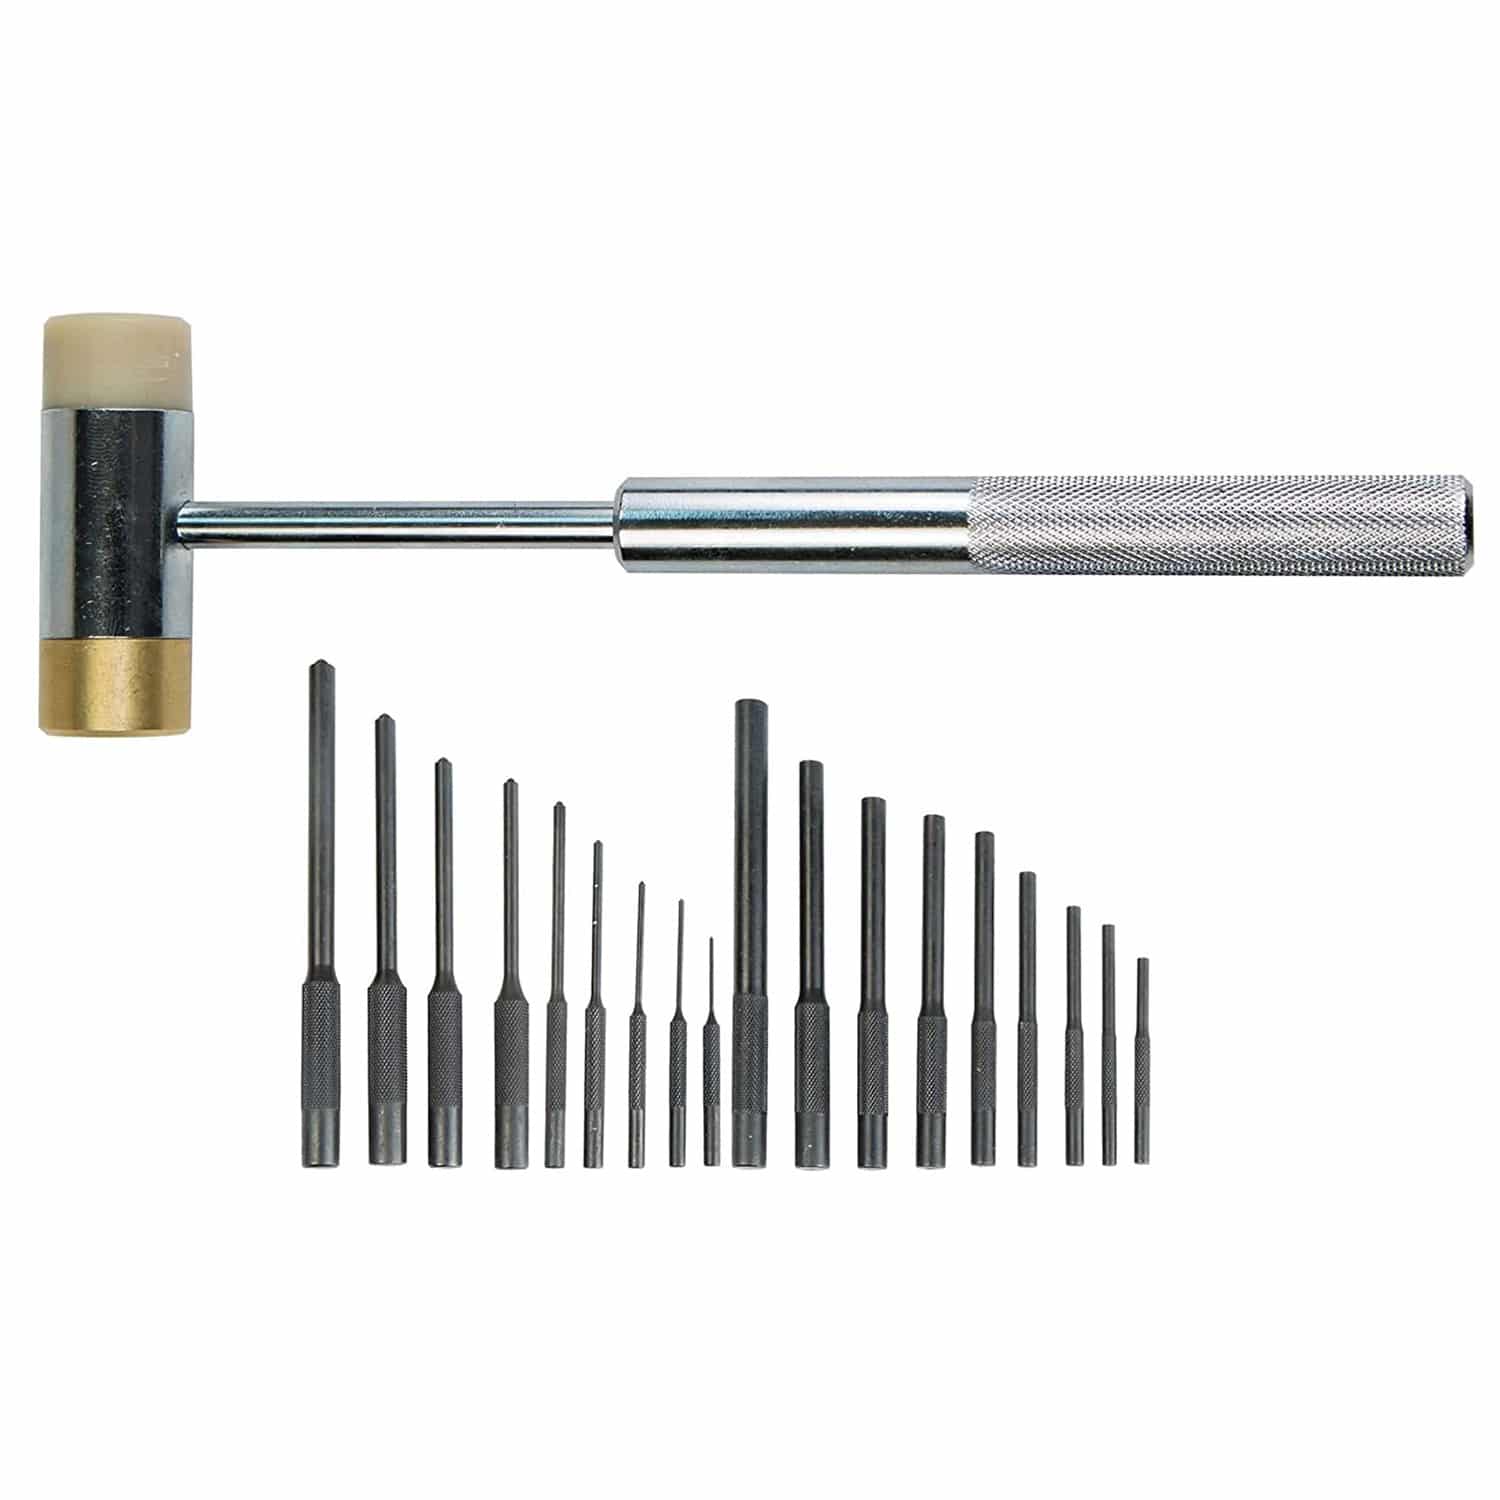 Wheeler Master Roll Pin Punch Kit with Hammer